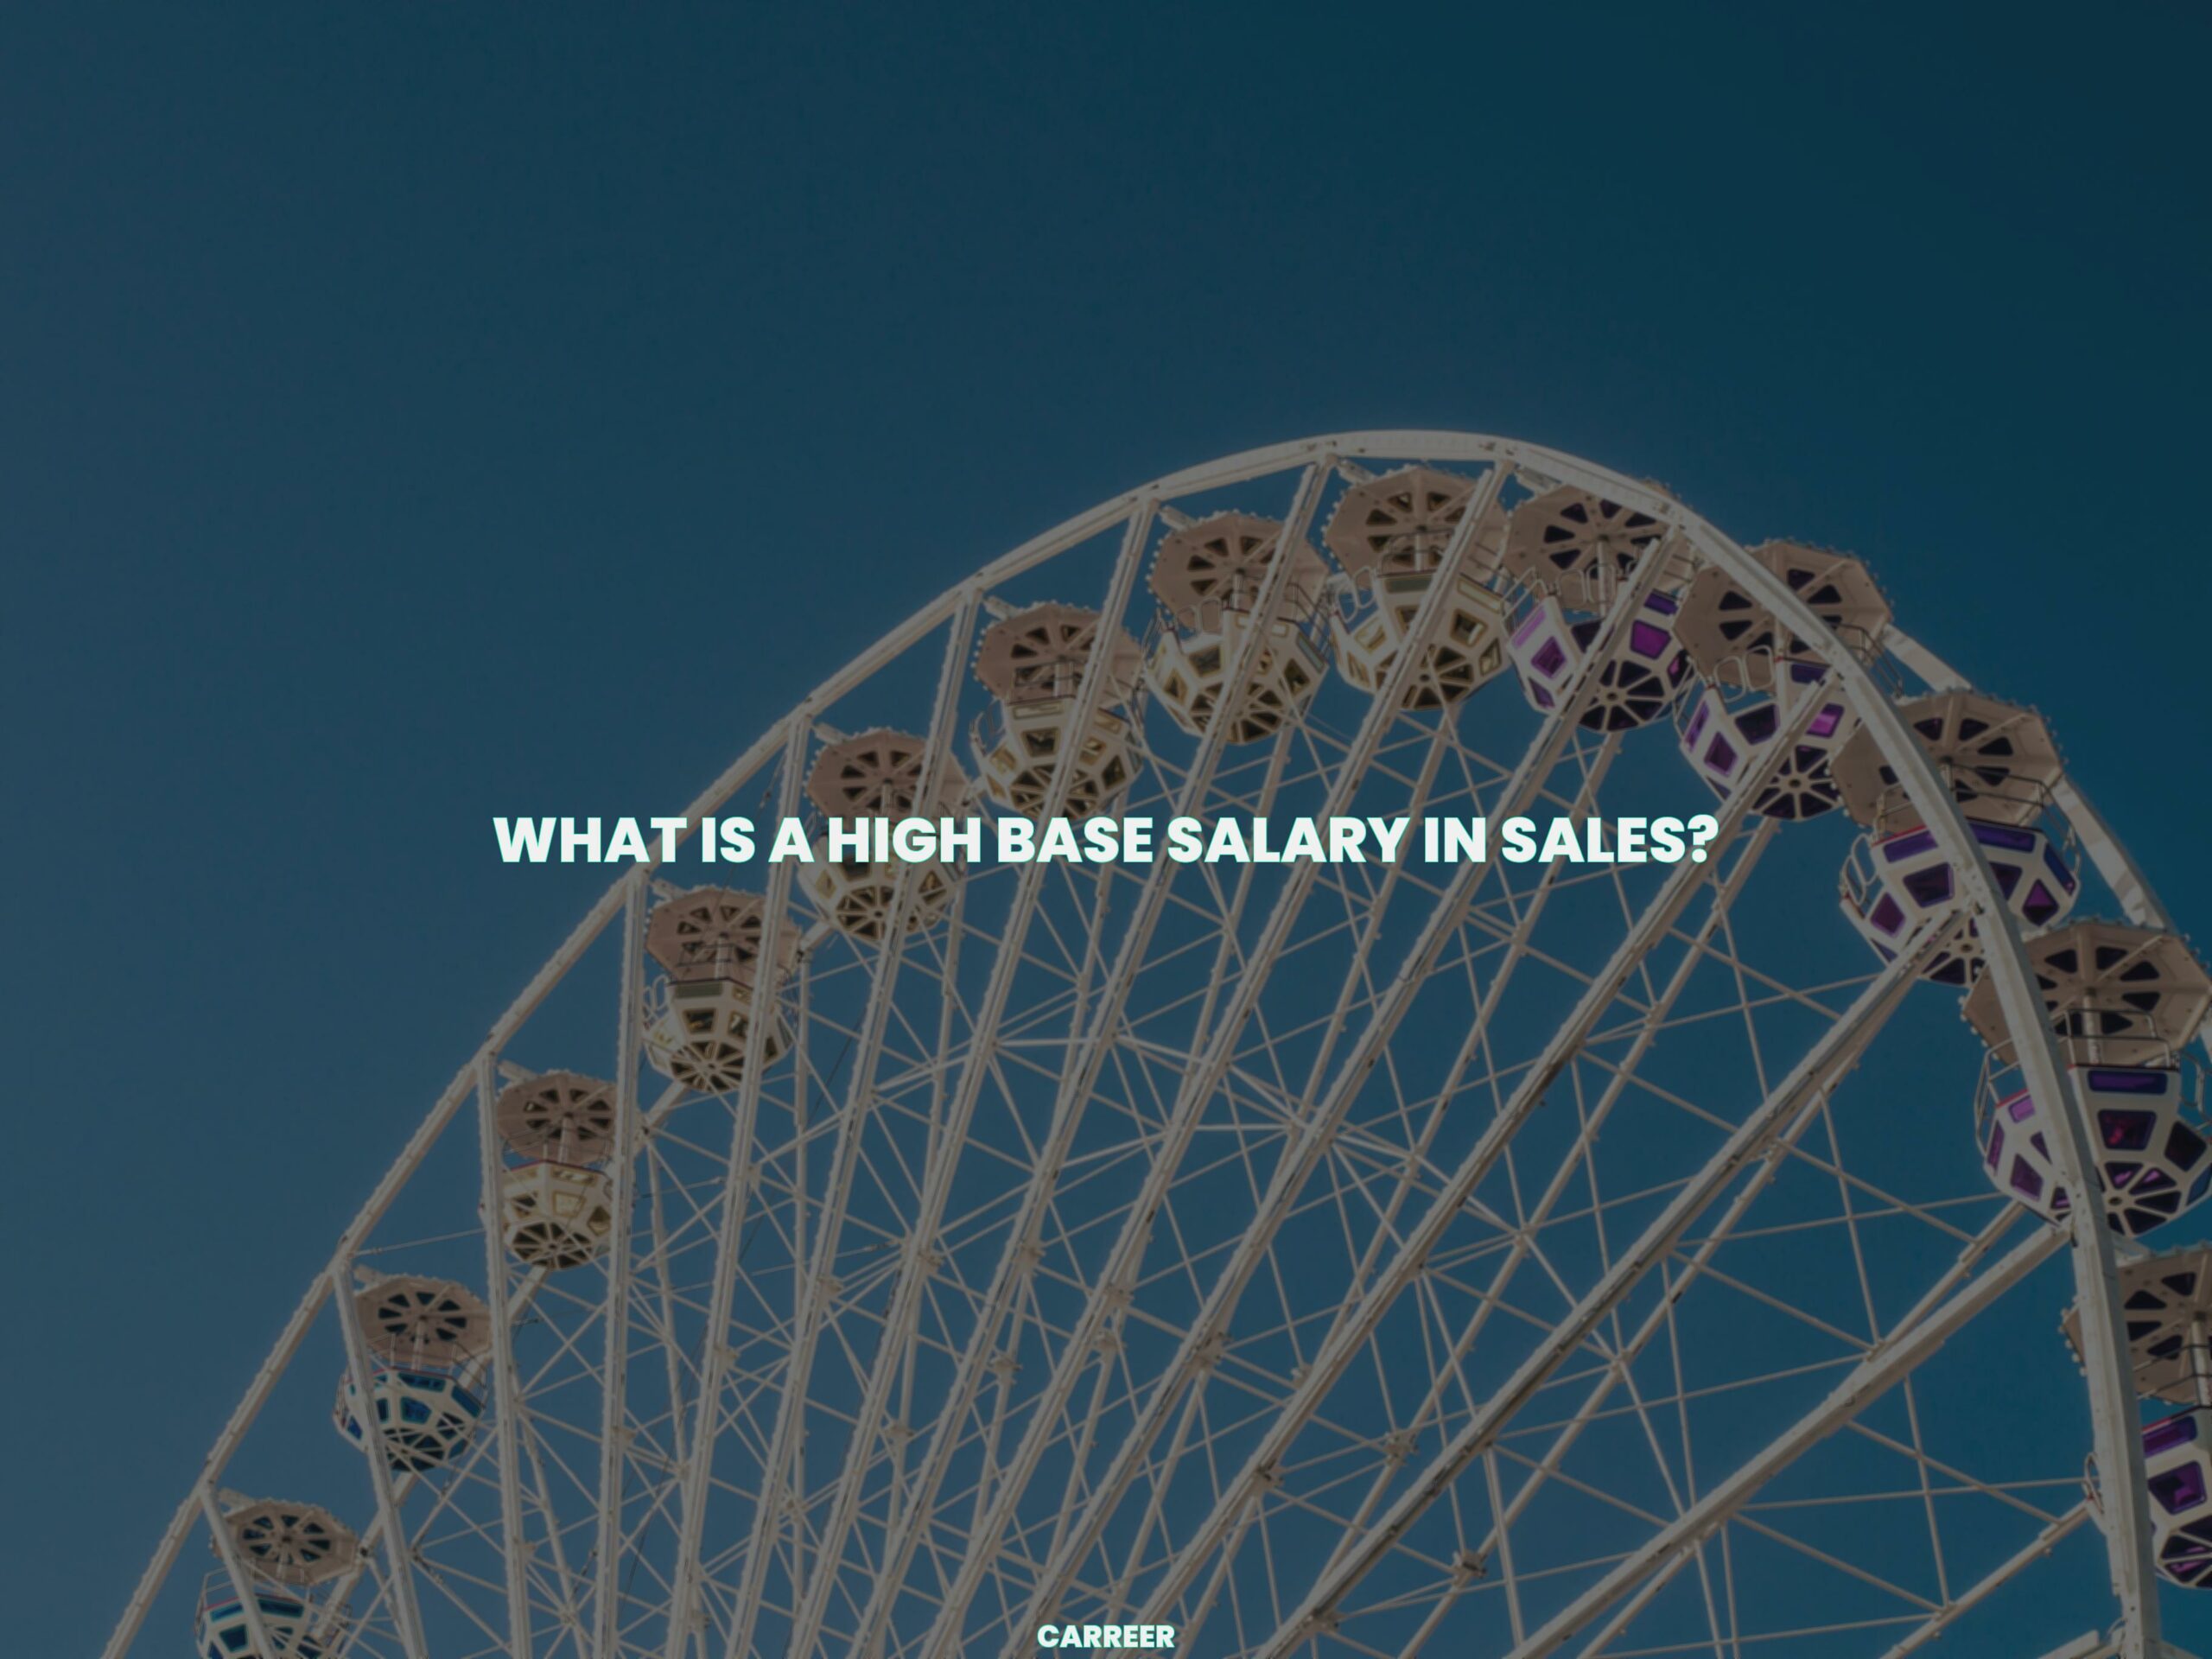 What is a high base salary in sales?